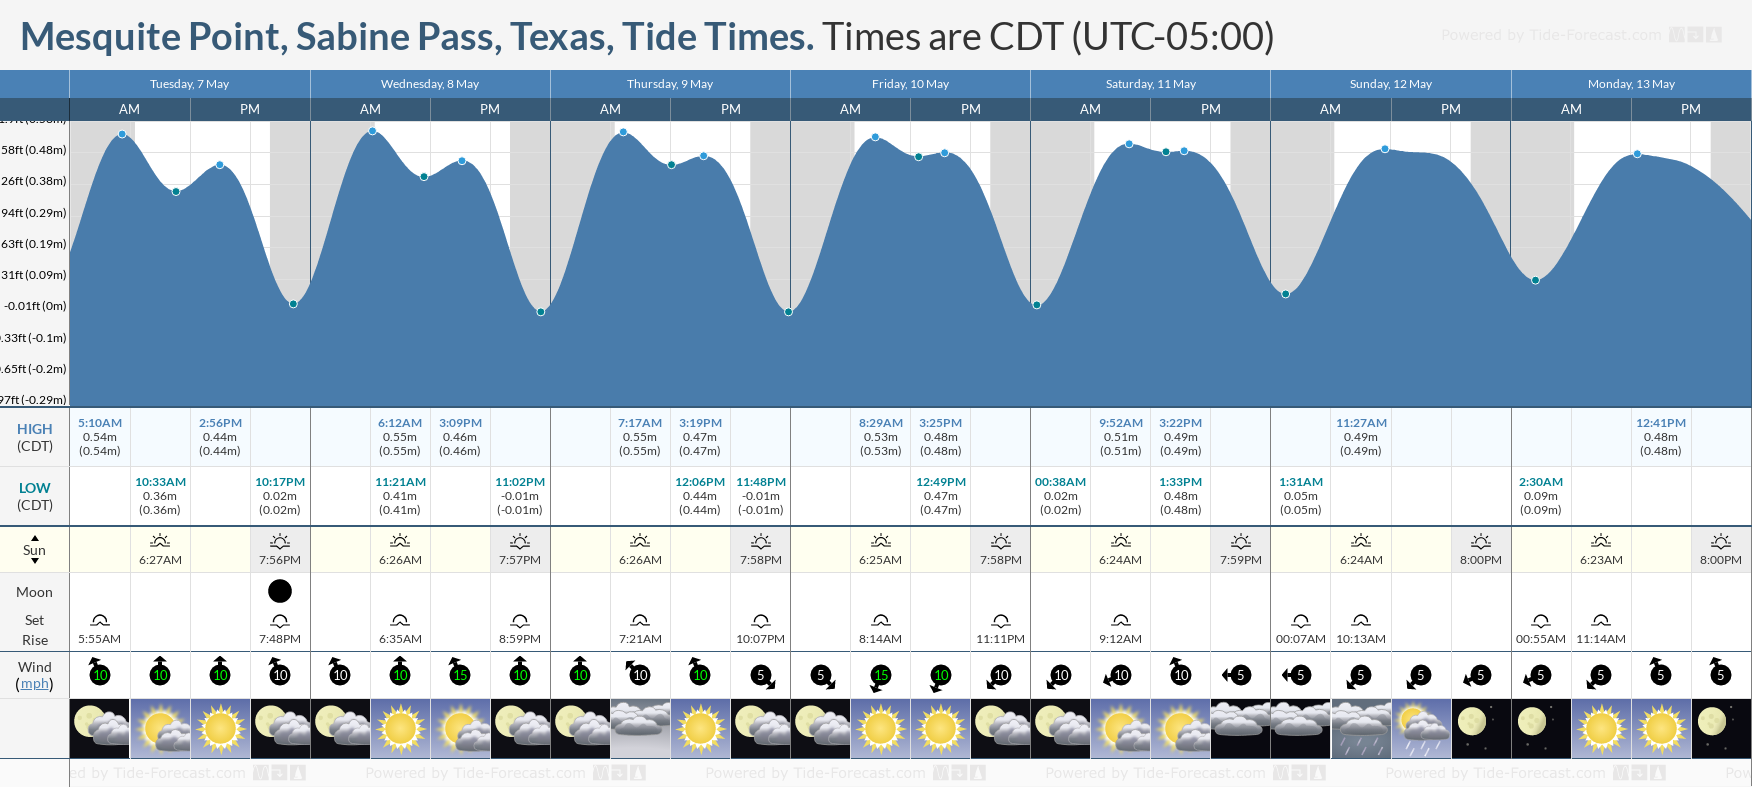 Mesquite Point, Sabine Pass, Texas Tide Chart including high and low tide times for the next 7 days